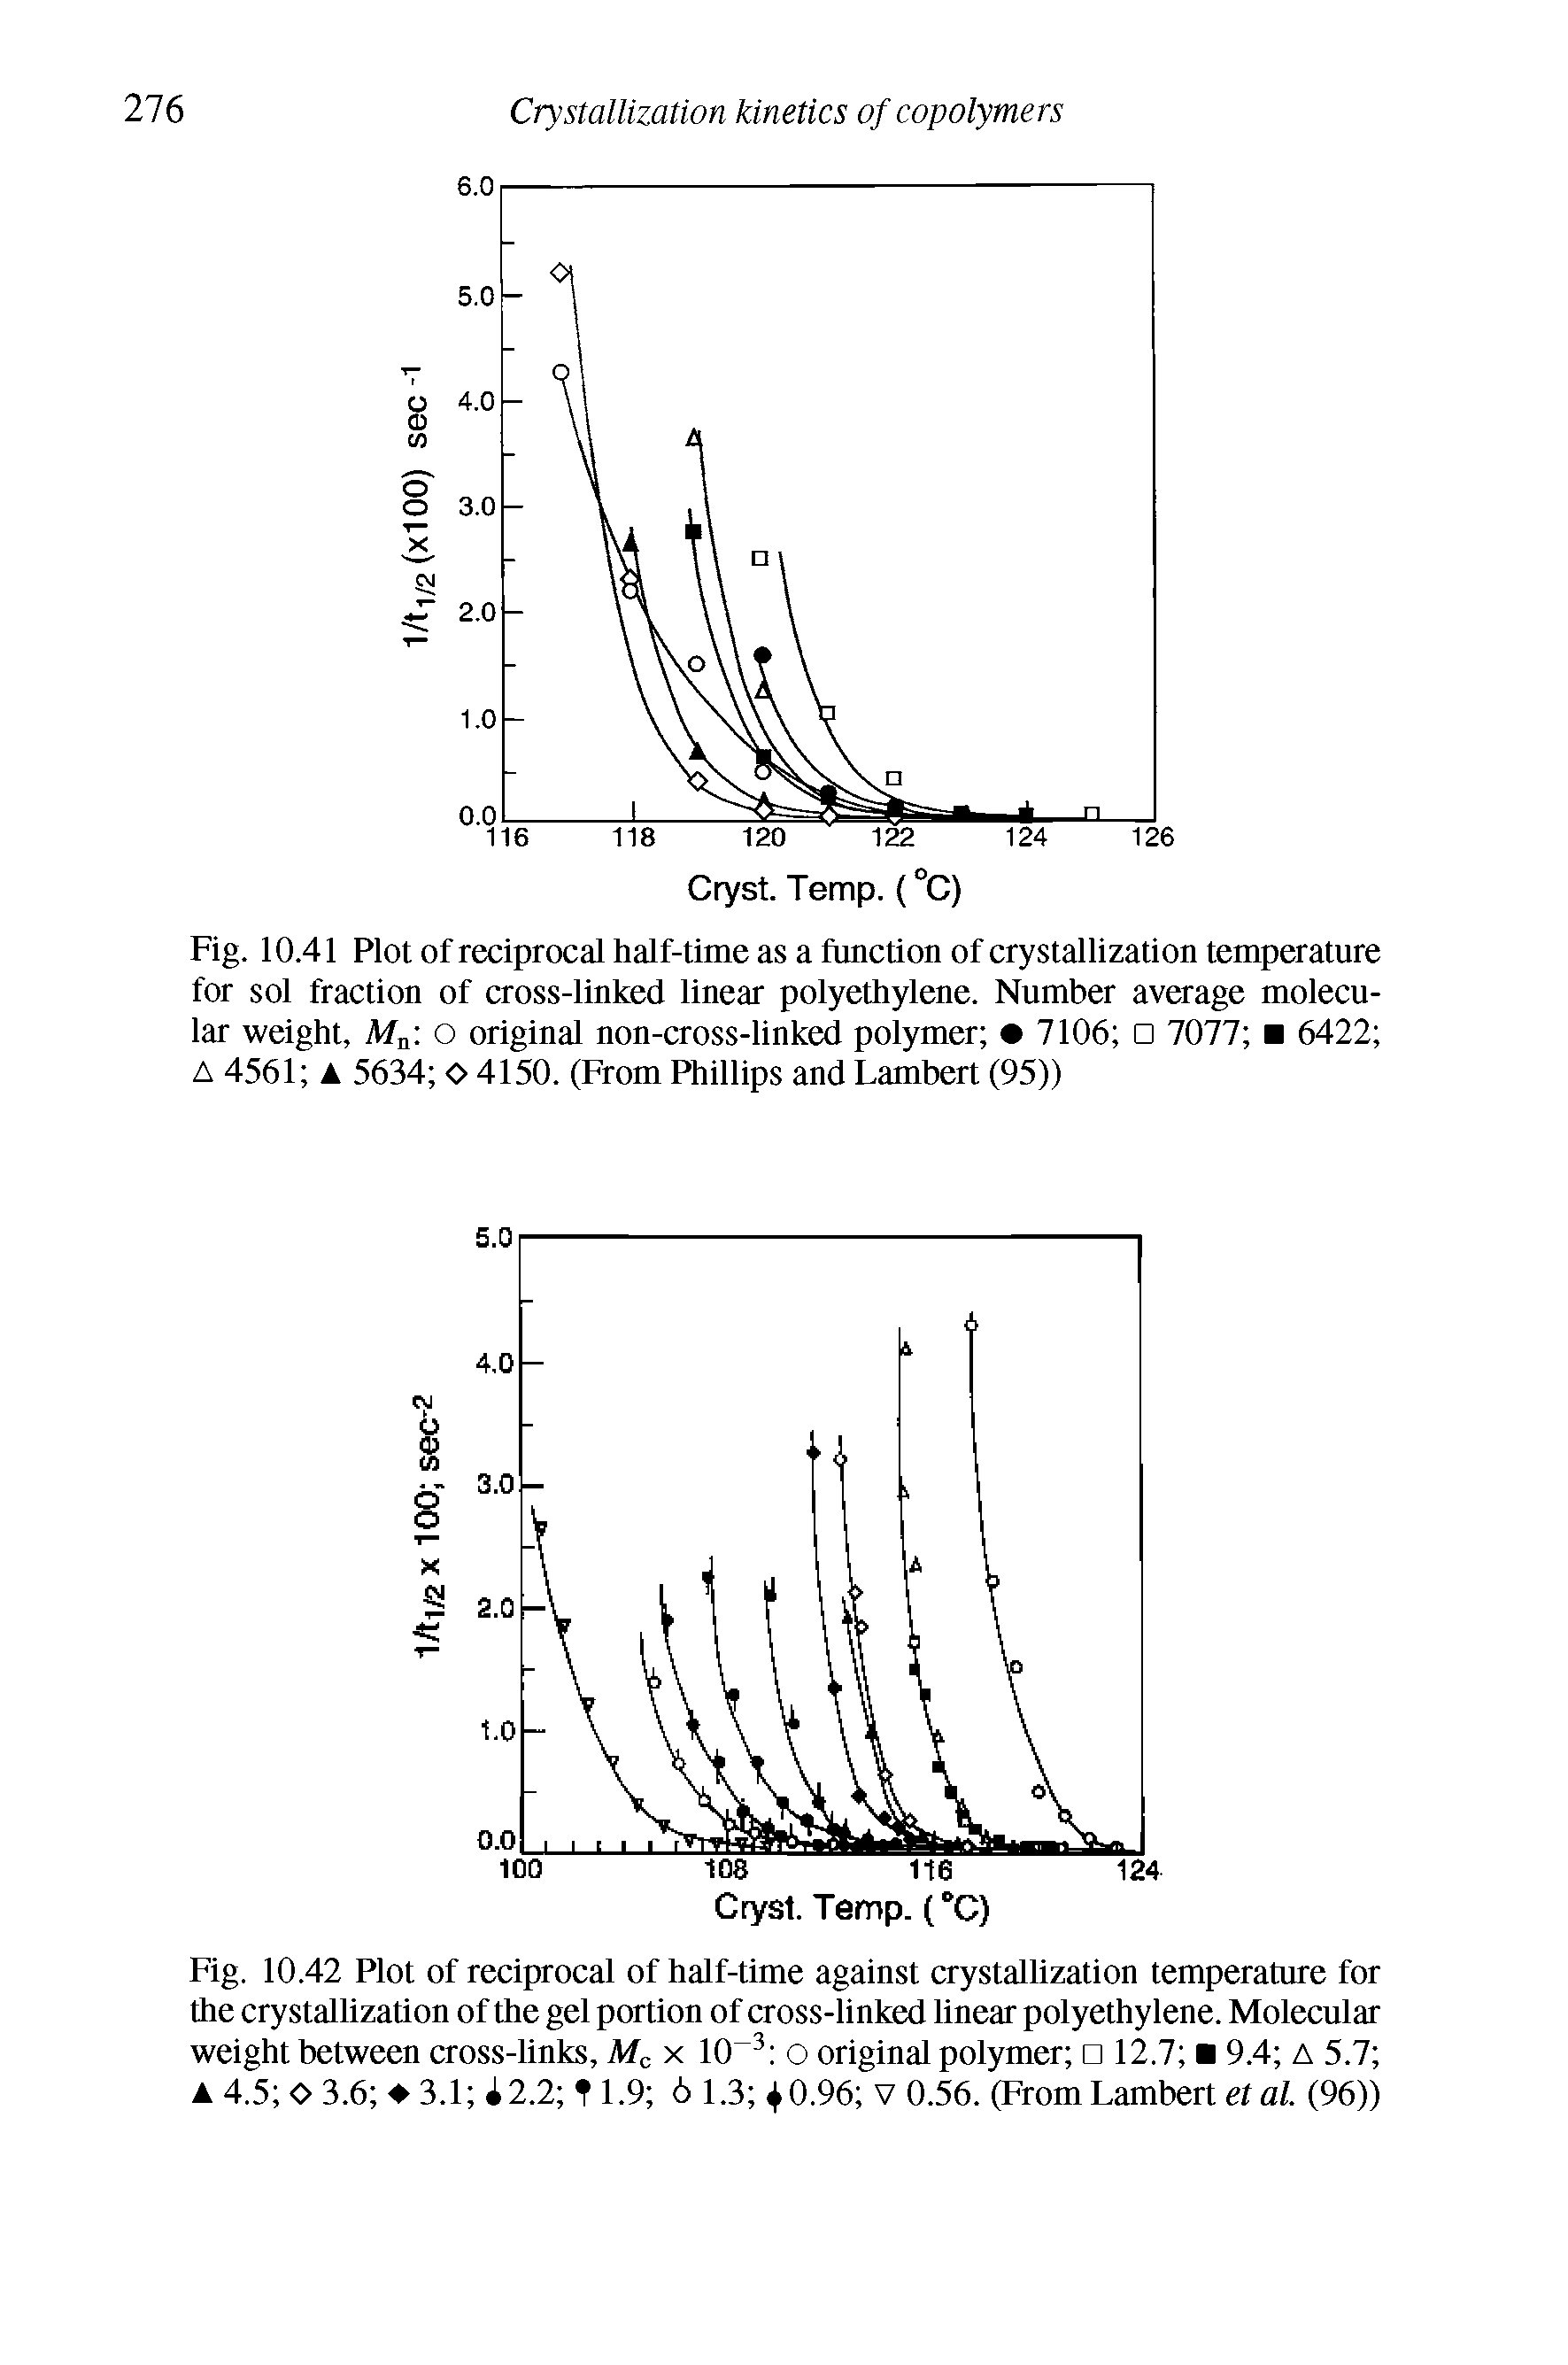 Fig. 10.42 Plot of reciprocal of half-time against crystallization temperature for the crystallization of the gel portion of cross-linked linear polyethylene. Molecular weight between cross-links. Me x 10 o original polymer 12.7 9.4 A 5.7 A 4.5 O 3.6 3.1 i2.2 11.9 6 1.3 0.96 V 0.56. (From Lambert etal (96))...